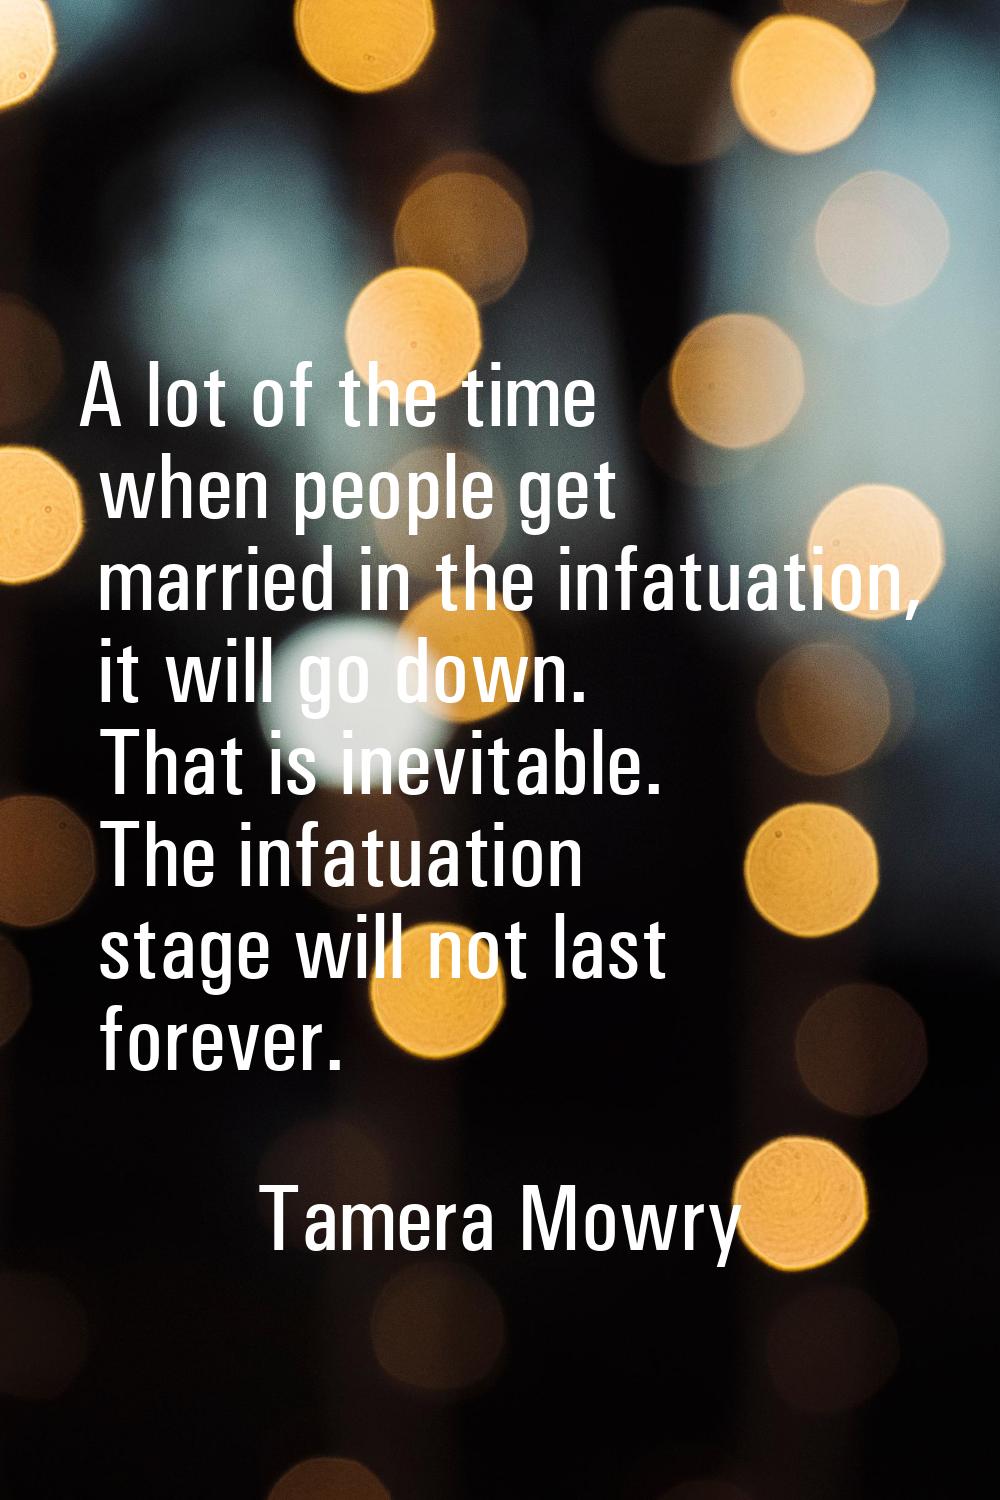 A lot of the time when people get married in the infatuation, it will go down. That is inevitable. 